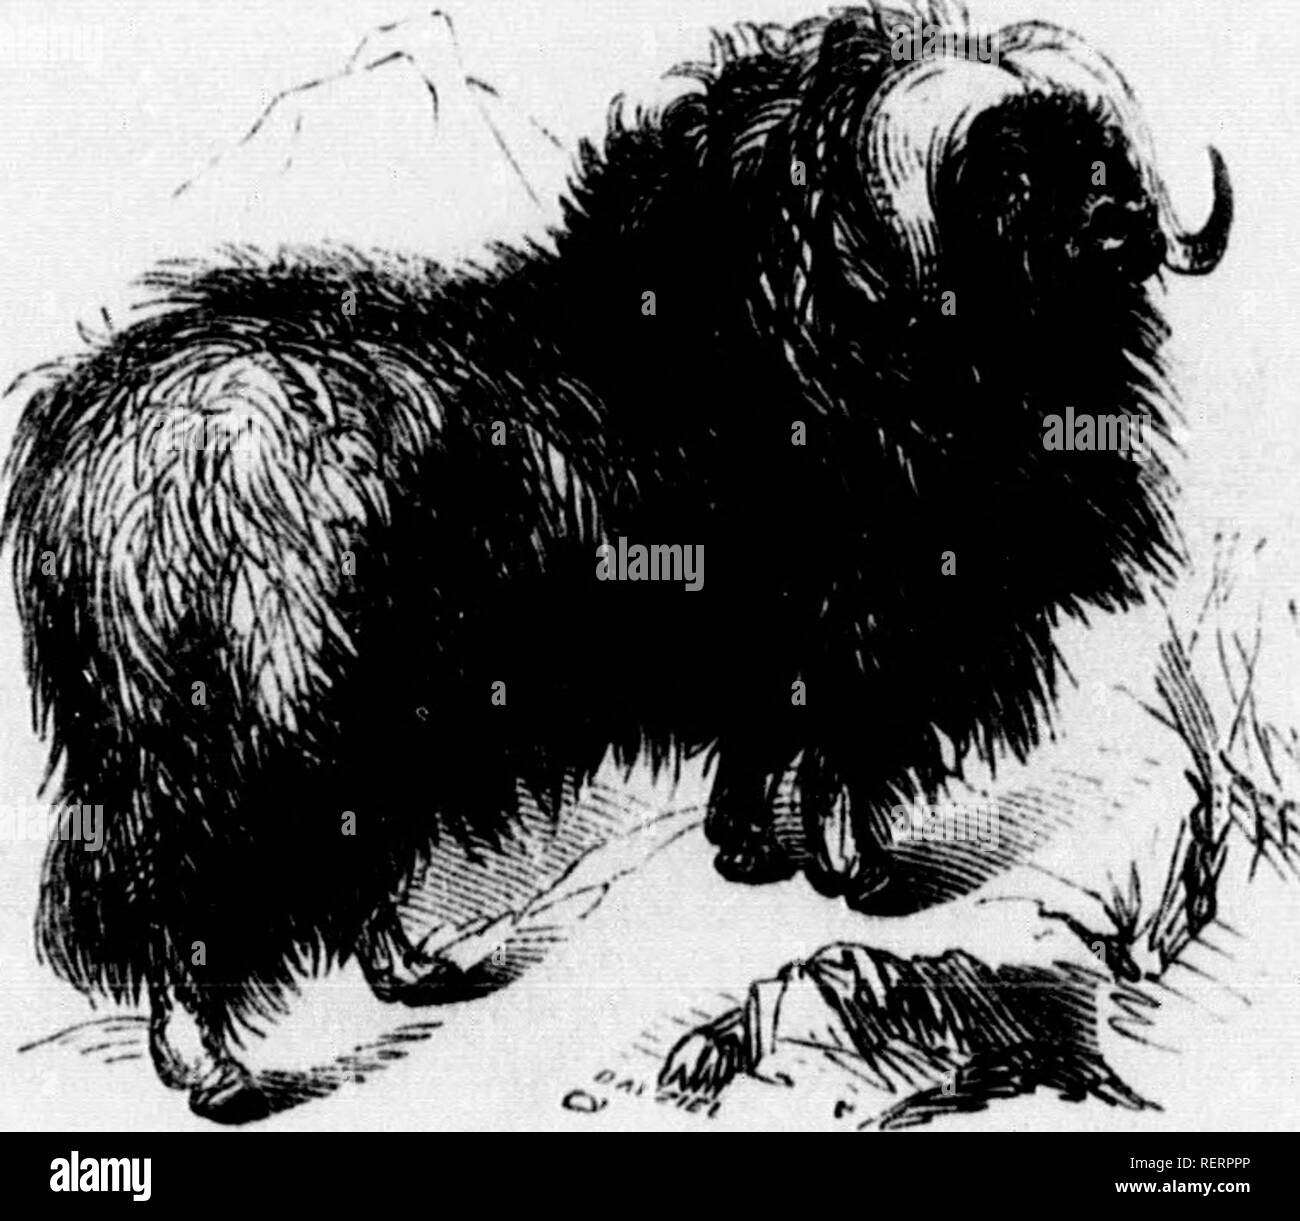 . The illustrated natural history [microform]. Natural history; Sciences naturelles. NATURAL HISTORY. OviBOS.â(Lat. Sheep-Ox.). Moschatus (Lat. lamky), the Mmk Ox. are very dangerous enemies. Both this animal and the Yak are small, scarcely equalling in size the small Highland cattle, but the thick hair which covers them makes them look larger than they really are. THE GNOO. The Gnoo, or Wildebeest, inhabits Southern Afric- At first sight it is difficult to say whether the horse, buffalo, or .â intclope predominates in its form. The horns cover the top of the forehead, and then sweeping downwa Stock Photo